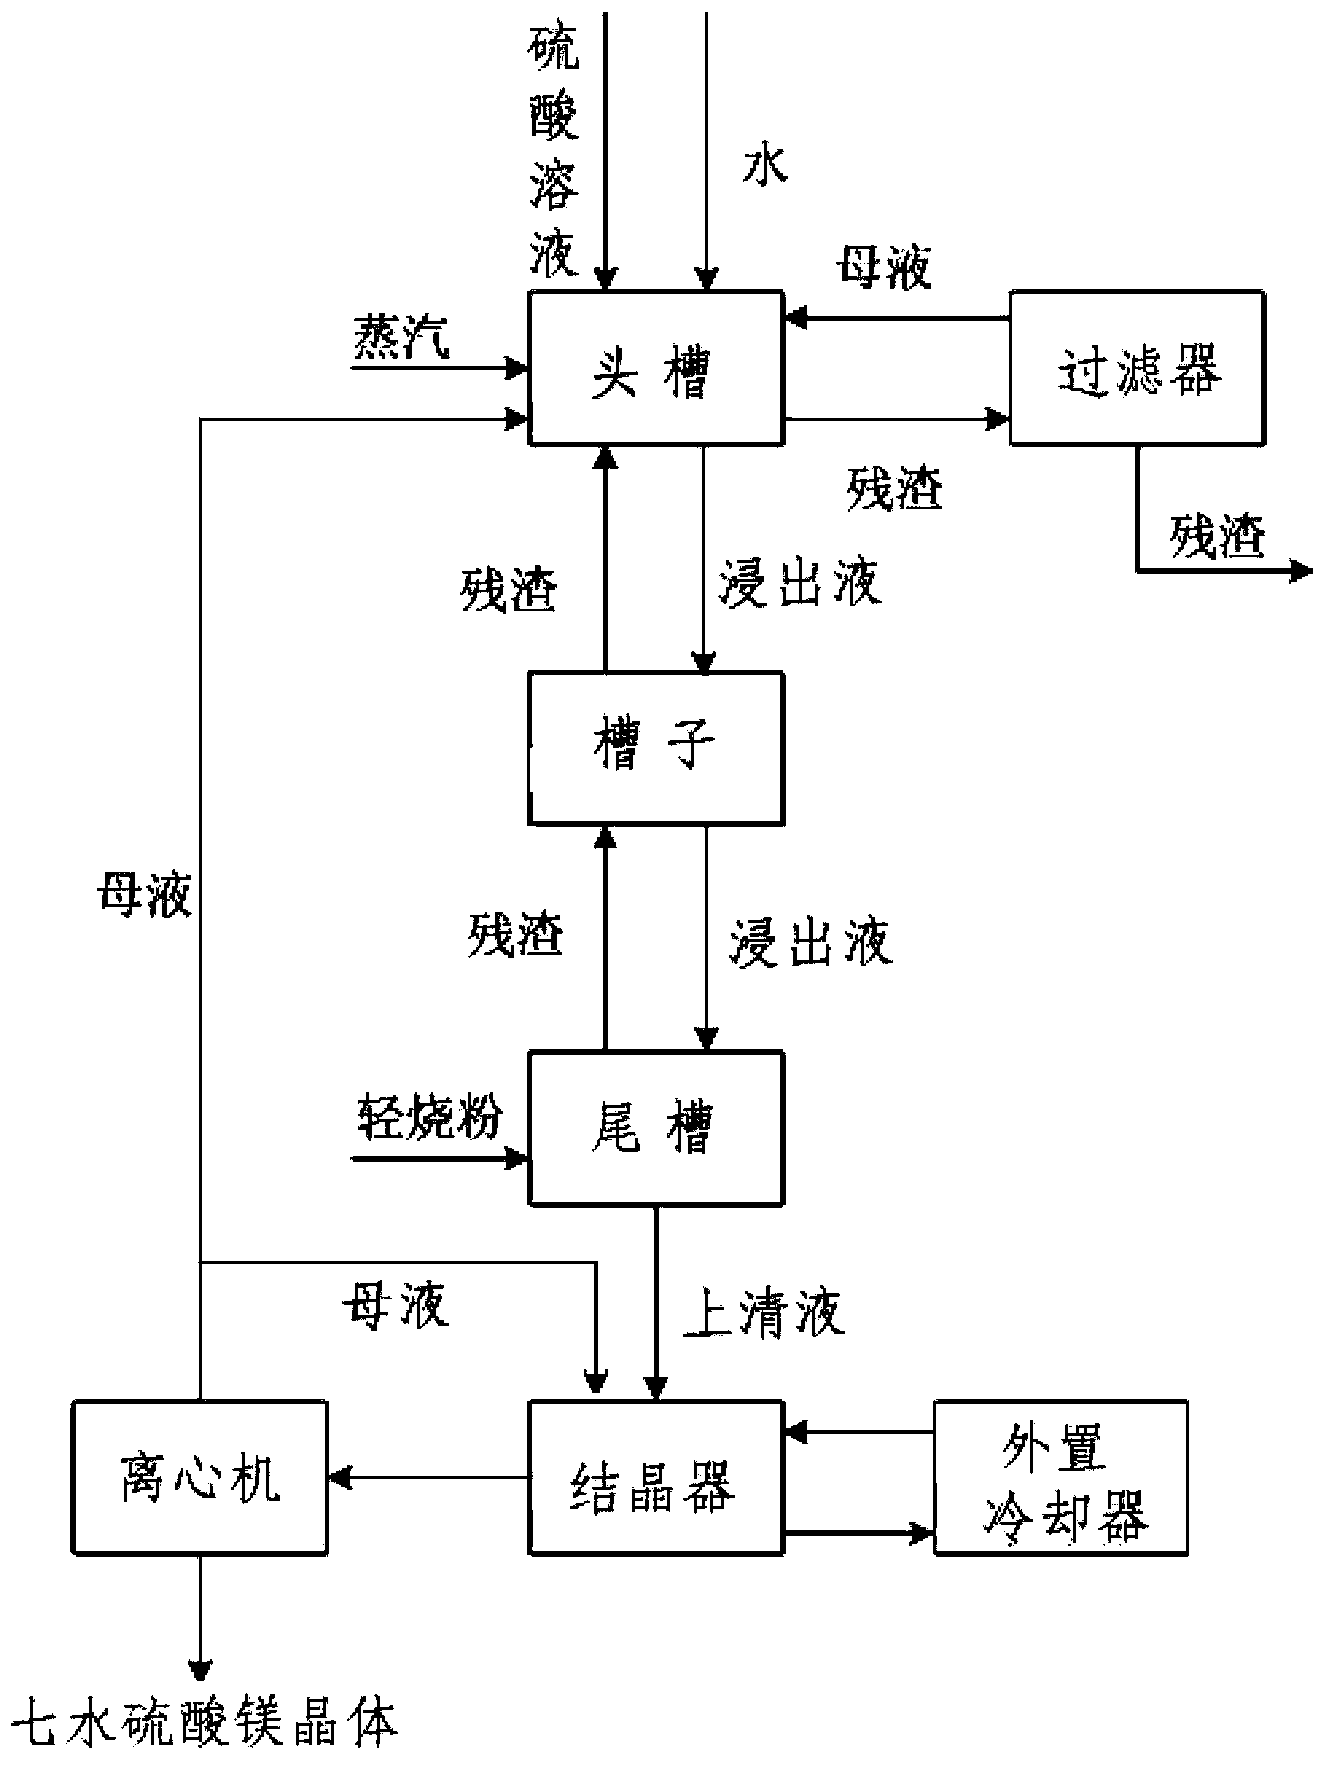 Magnesium sulfate heptahydrate producing process with fully-continuous method